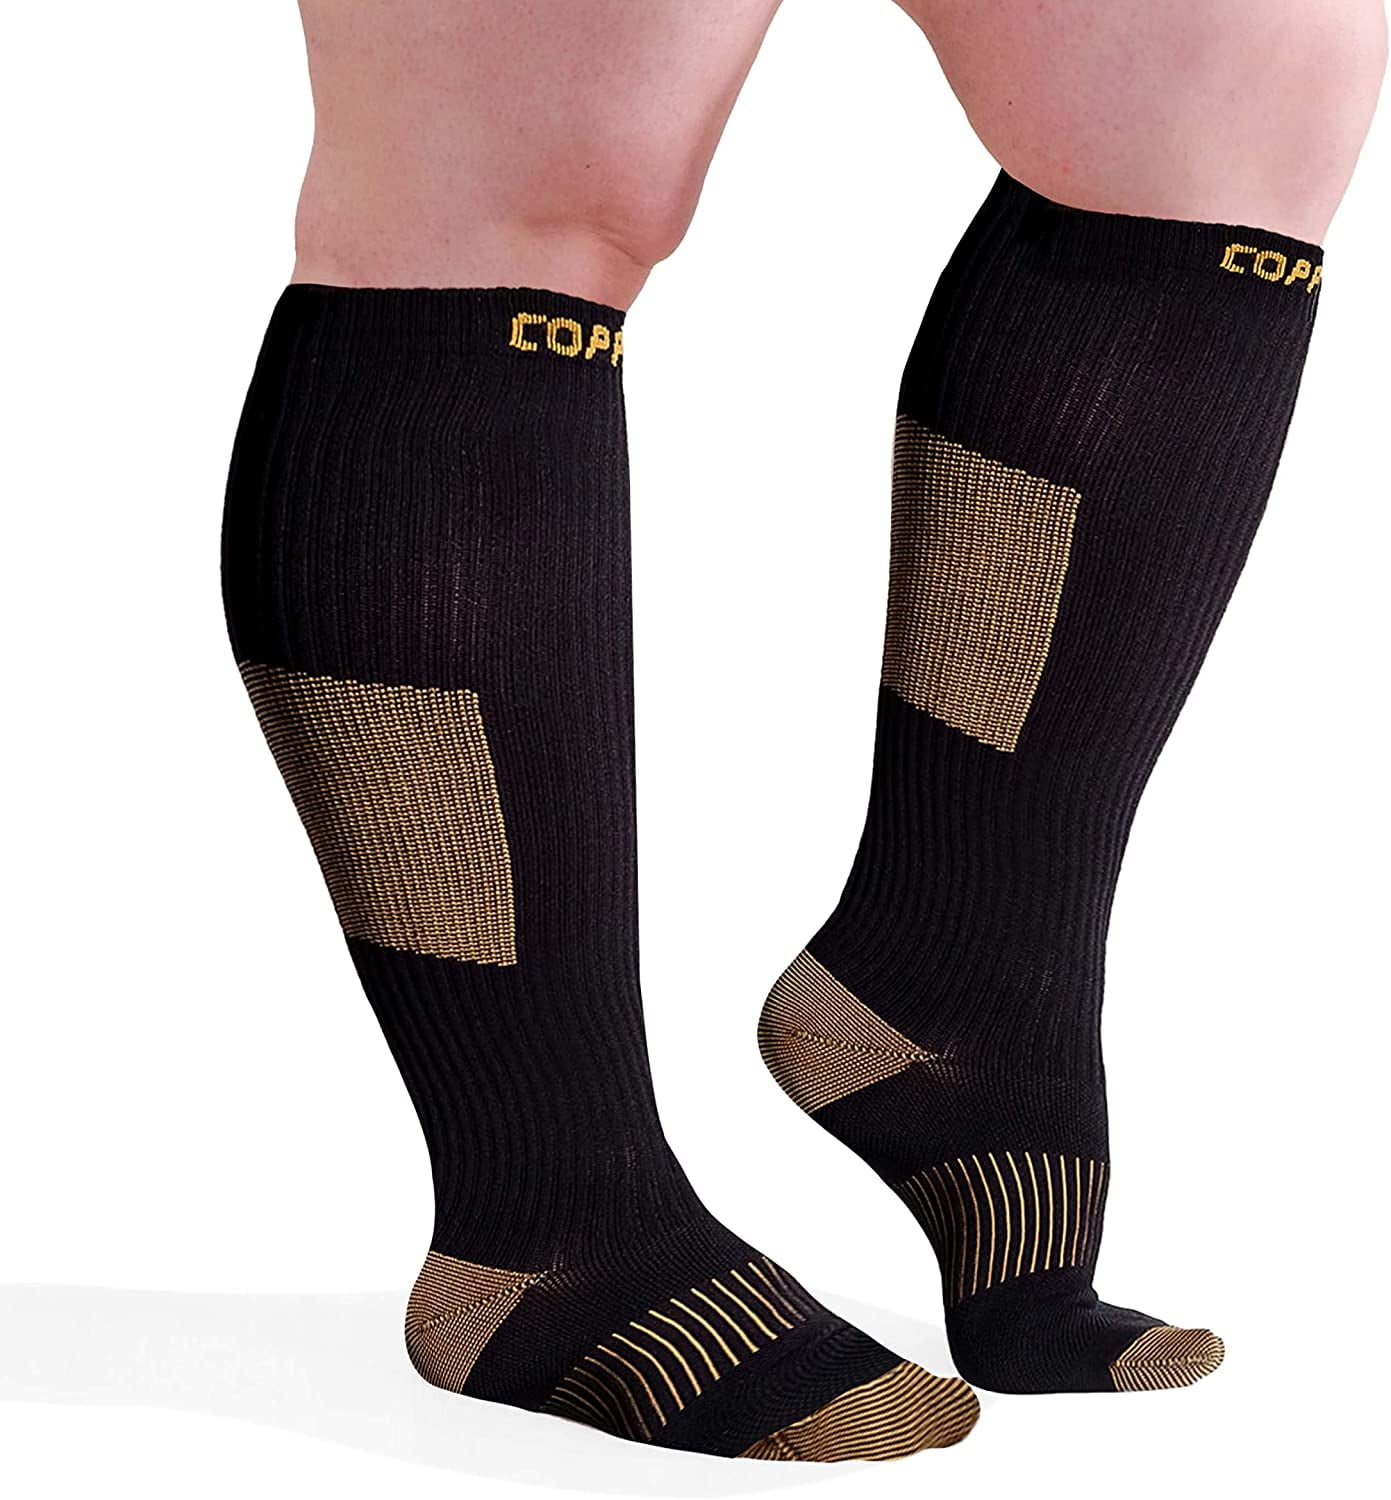 CopperJoint Copper Compression Socks - Knee High Socks for Men and Women -  15-20 mmHg Zipperless Long Compression Stocking for Nurses, Running Hiking